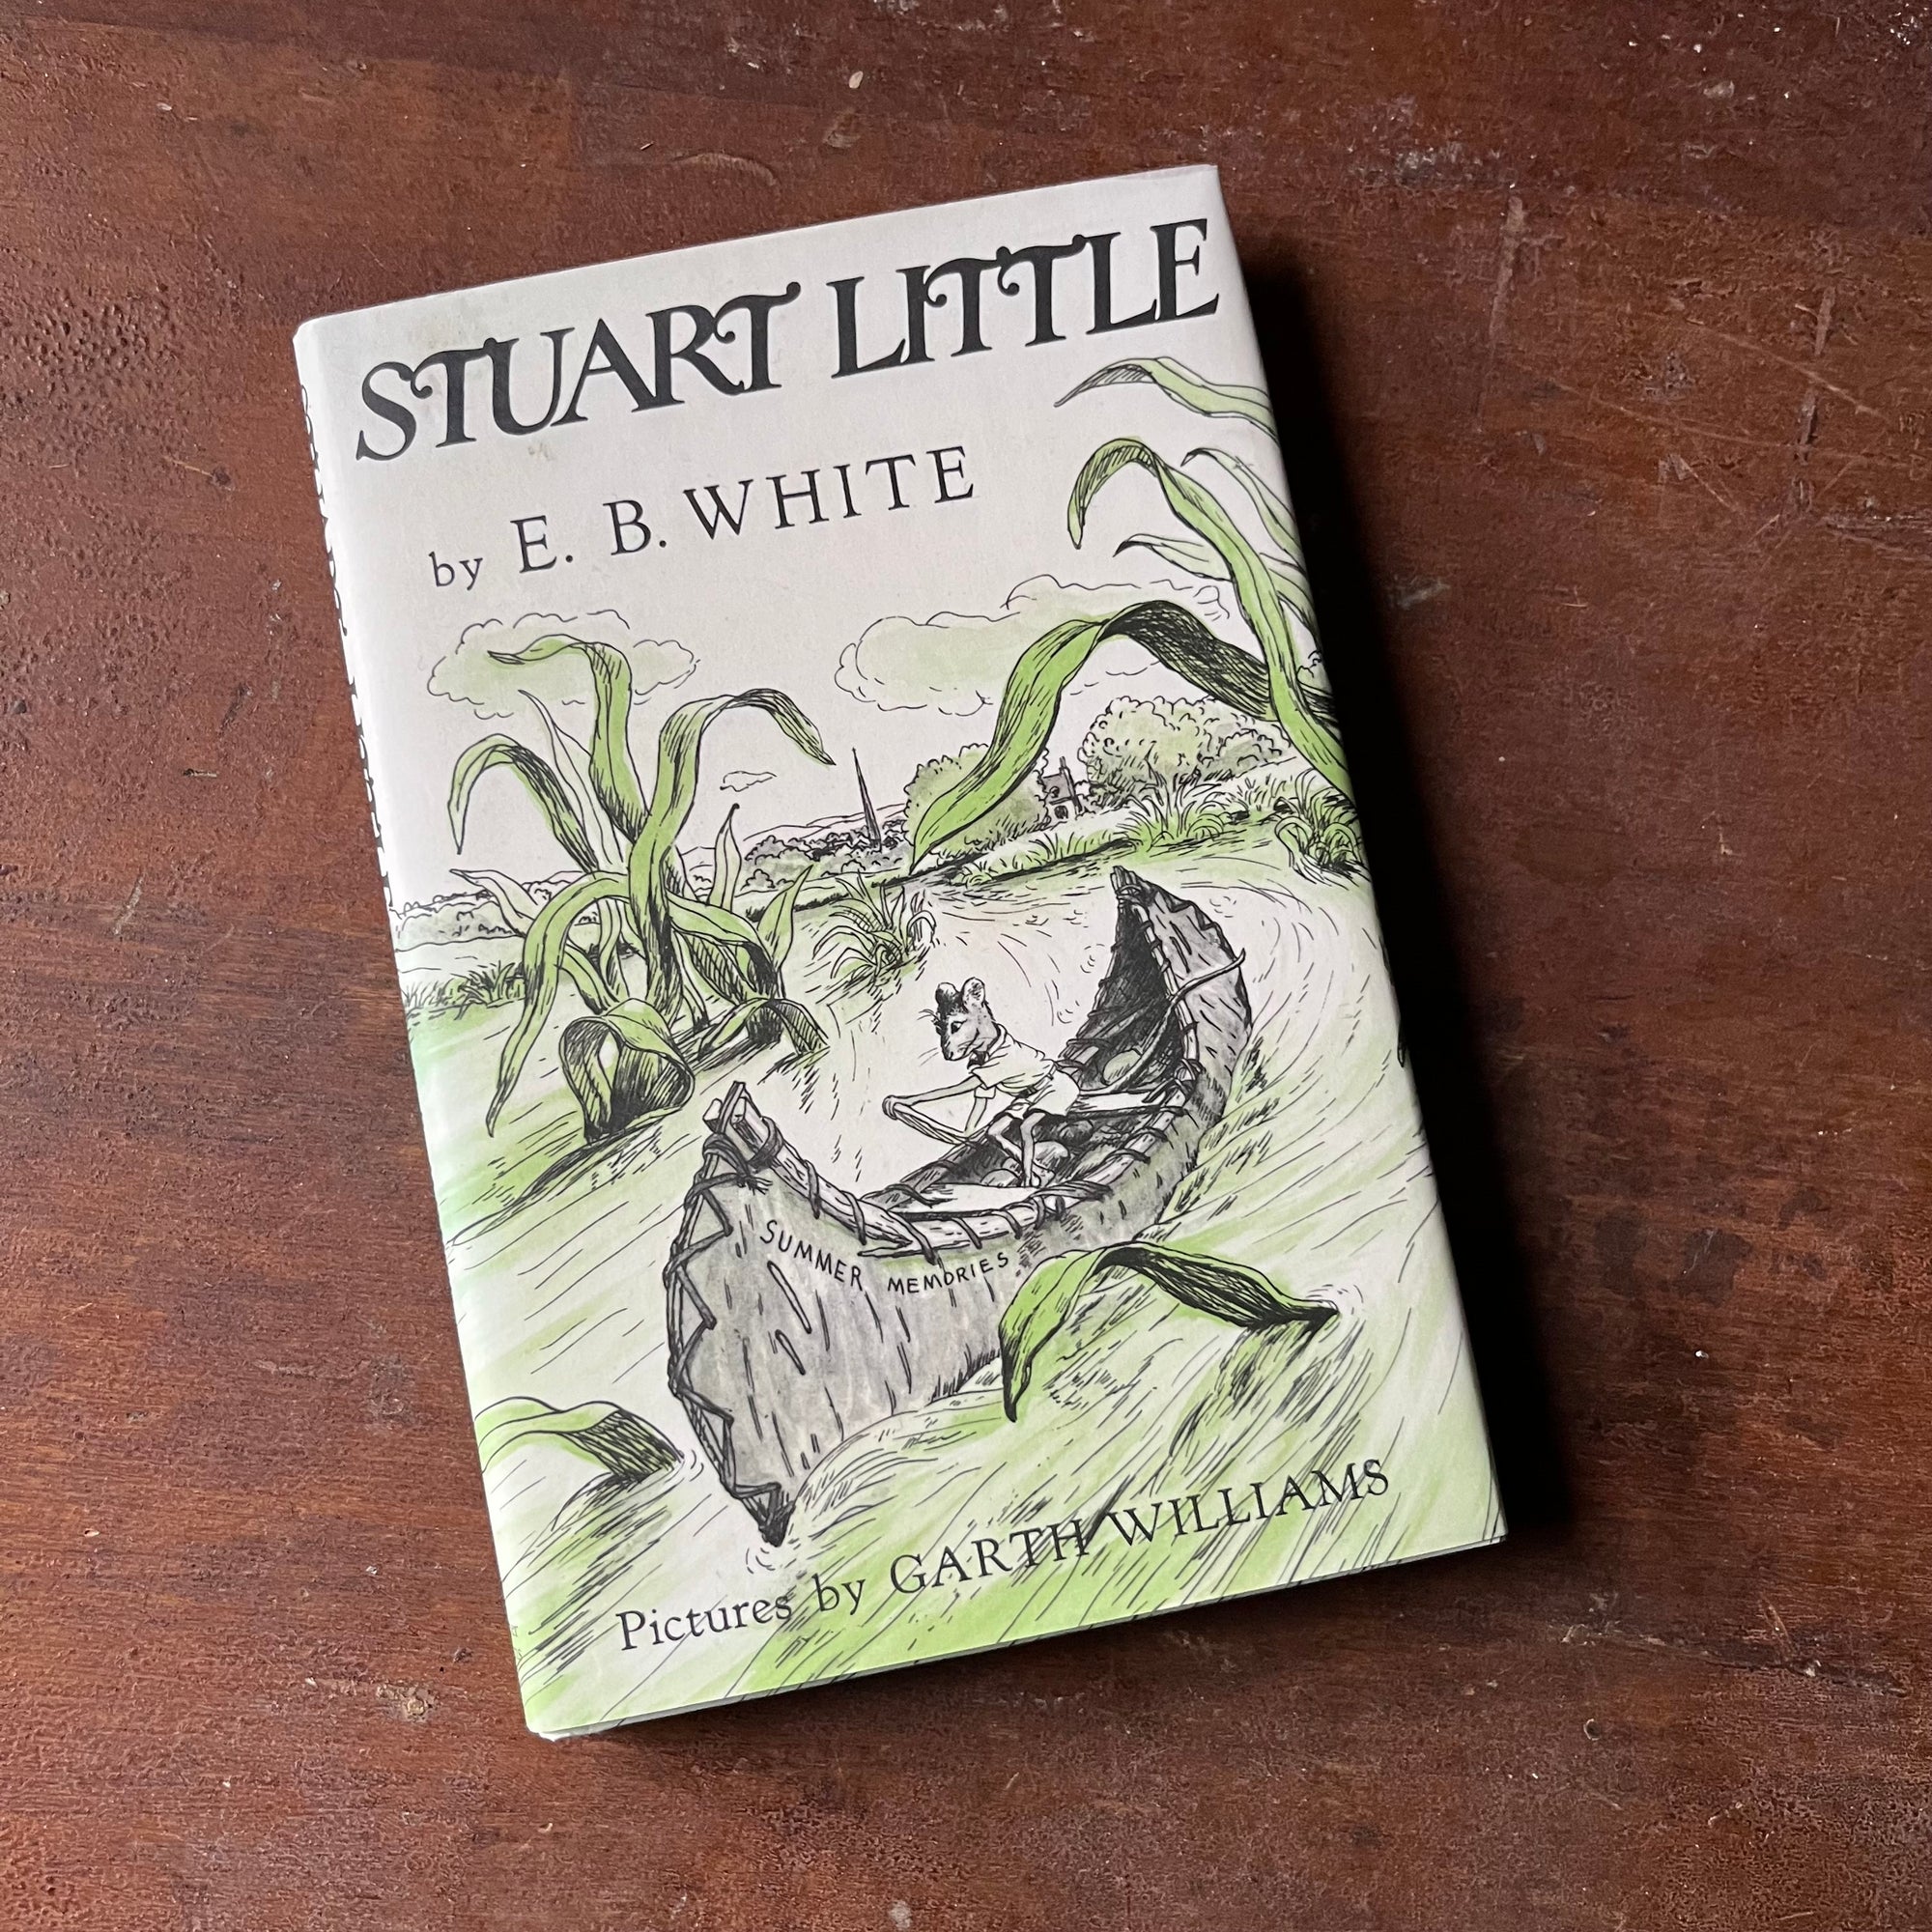 Log Cabin Vintage – vintage children’s book, children’s book, chapter book - Stuart Little written by E. B. White with illustrations by Garth Williams - view of the dust jacket's front cover with Stuart Little in a canoe